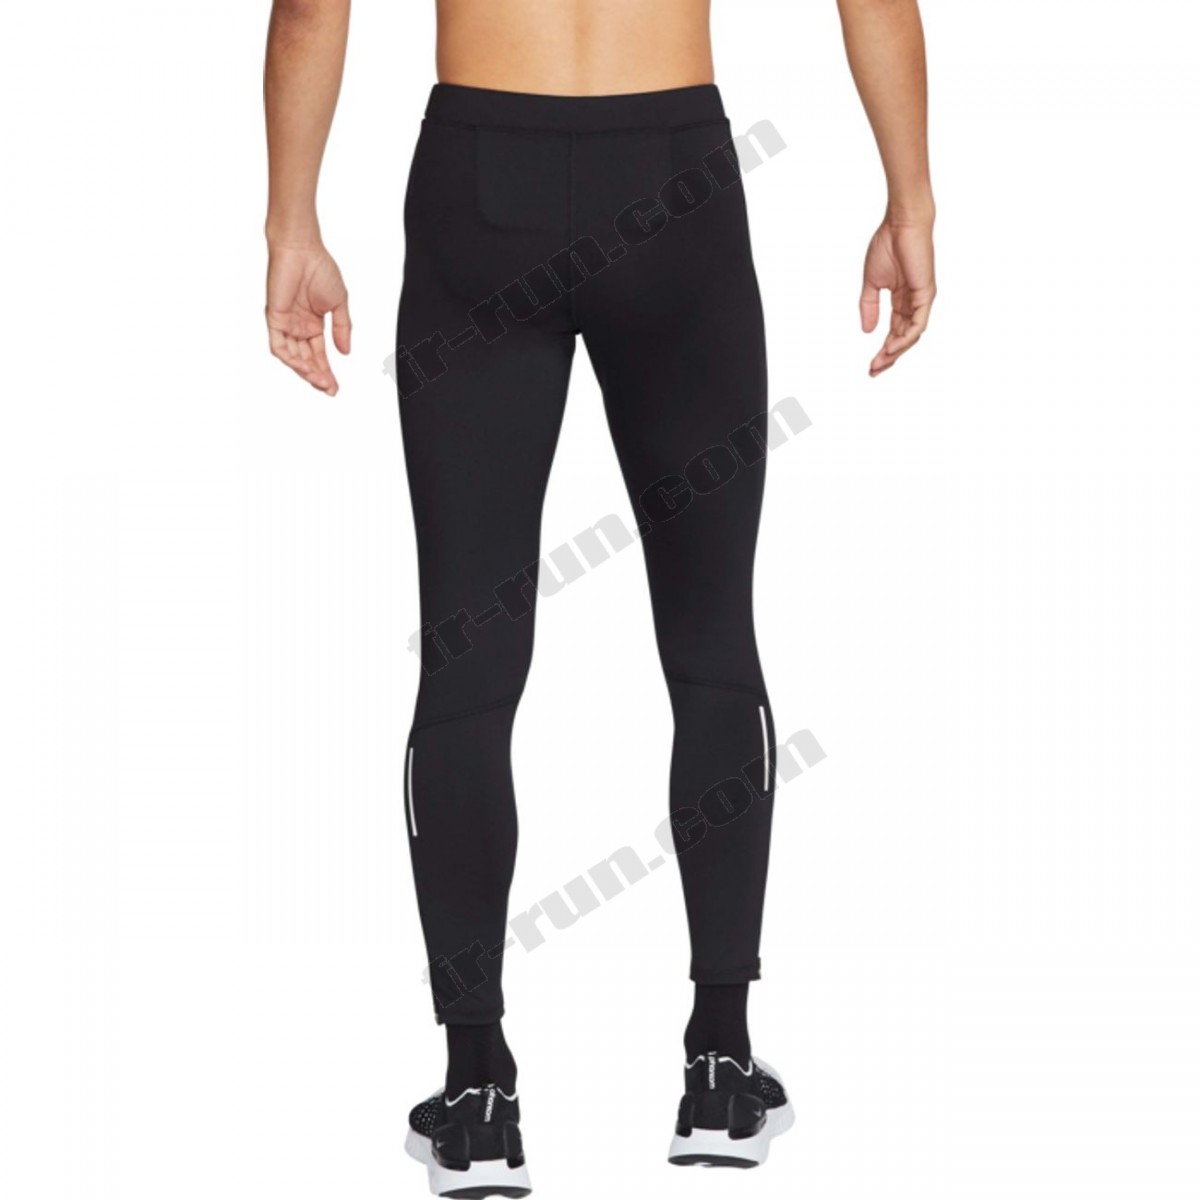 Nike/LEGGING running homme NIKE DF CHLLGR √ Nouveau style √ Soldes - -3